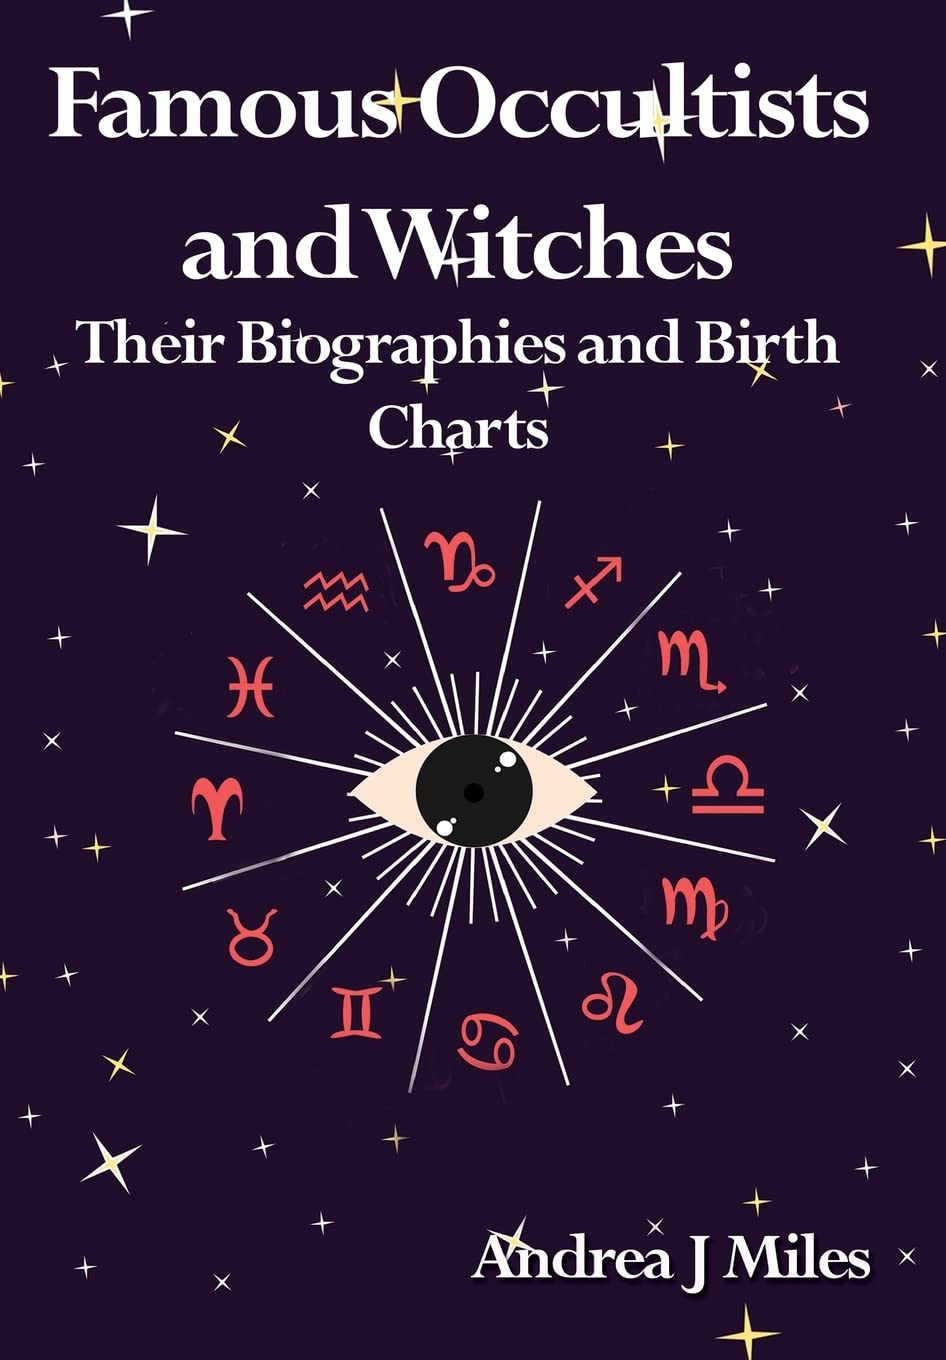 Famous Occultists and Witches